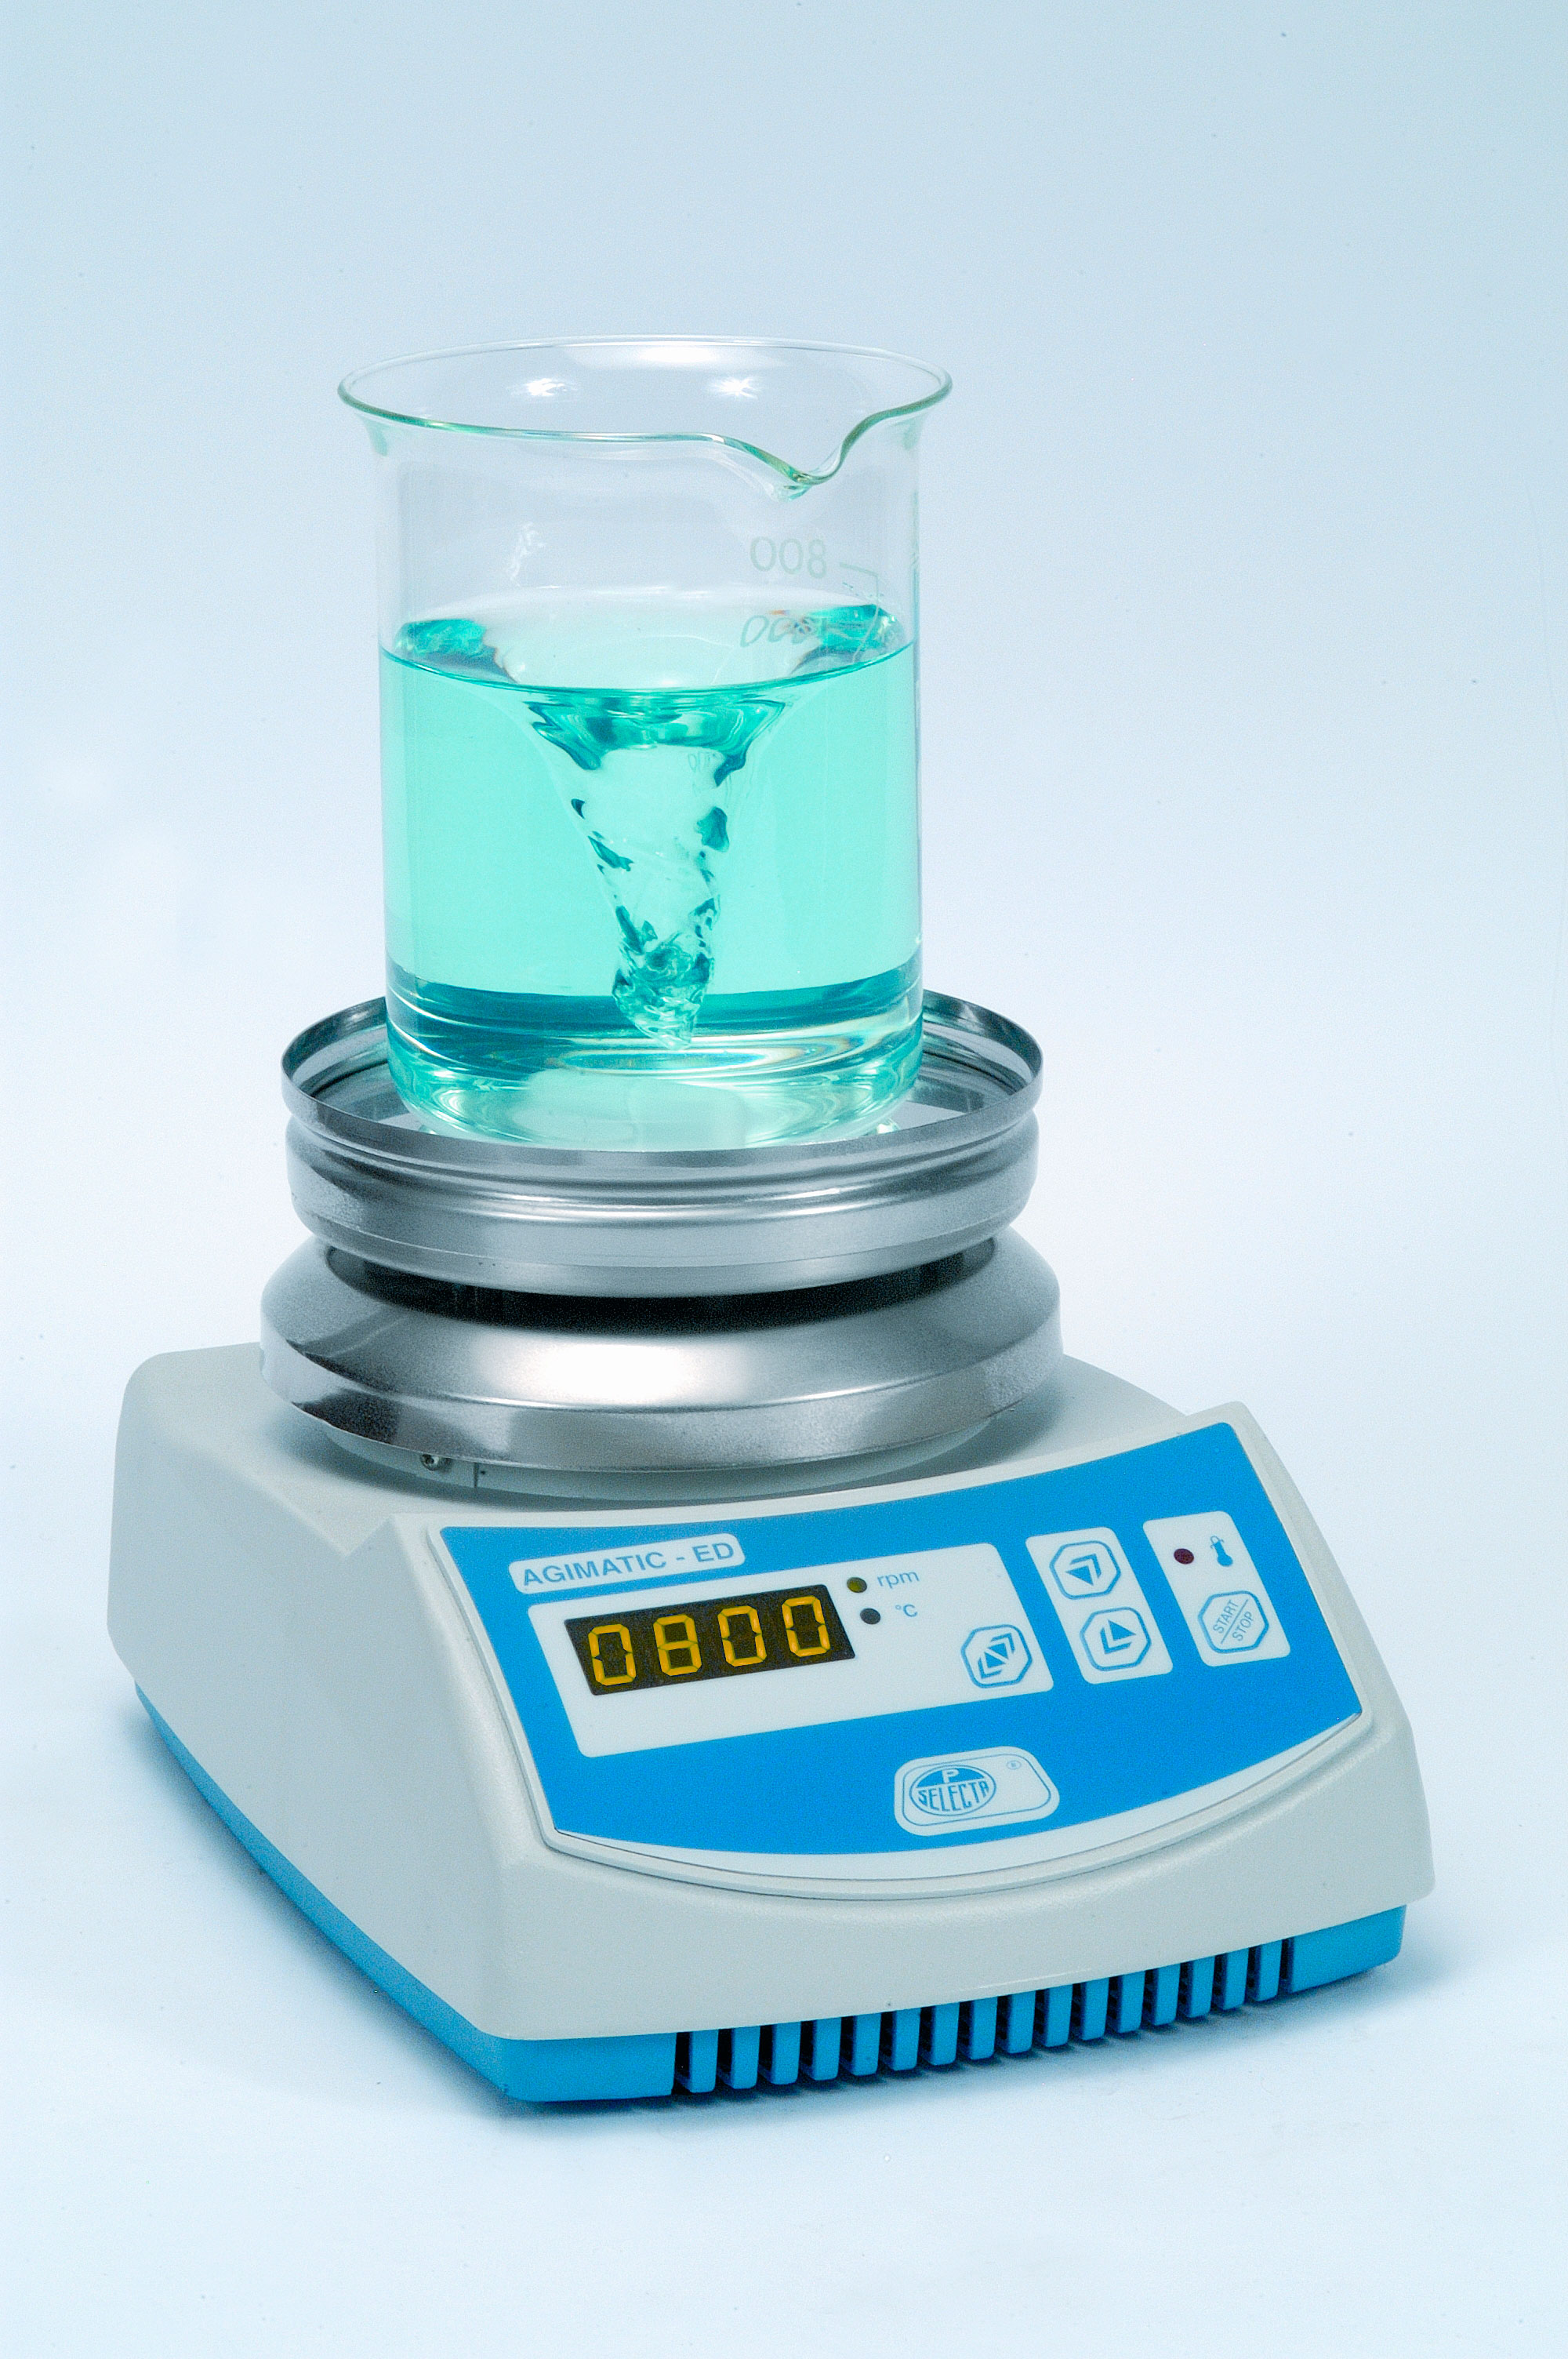 Magnetic stirrer Agimatic-ED with heating. J.P. SELECTA®. Speed (rpm): 60 -1600. Stirring volume (l): Up to 10. Temp. (ºC): 50 -350. Material: Silmin upper plate covered by stainless steel. Ø plate (mm): 145. Dim. WxHxD (mm): 190x145x260. Power (W): 550. Weight (Kg): 3,2